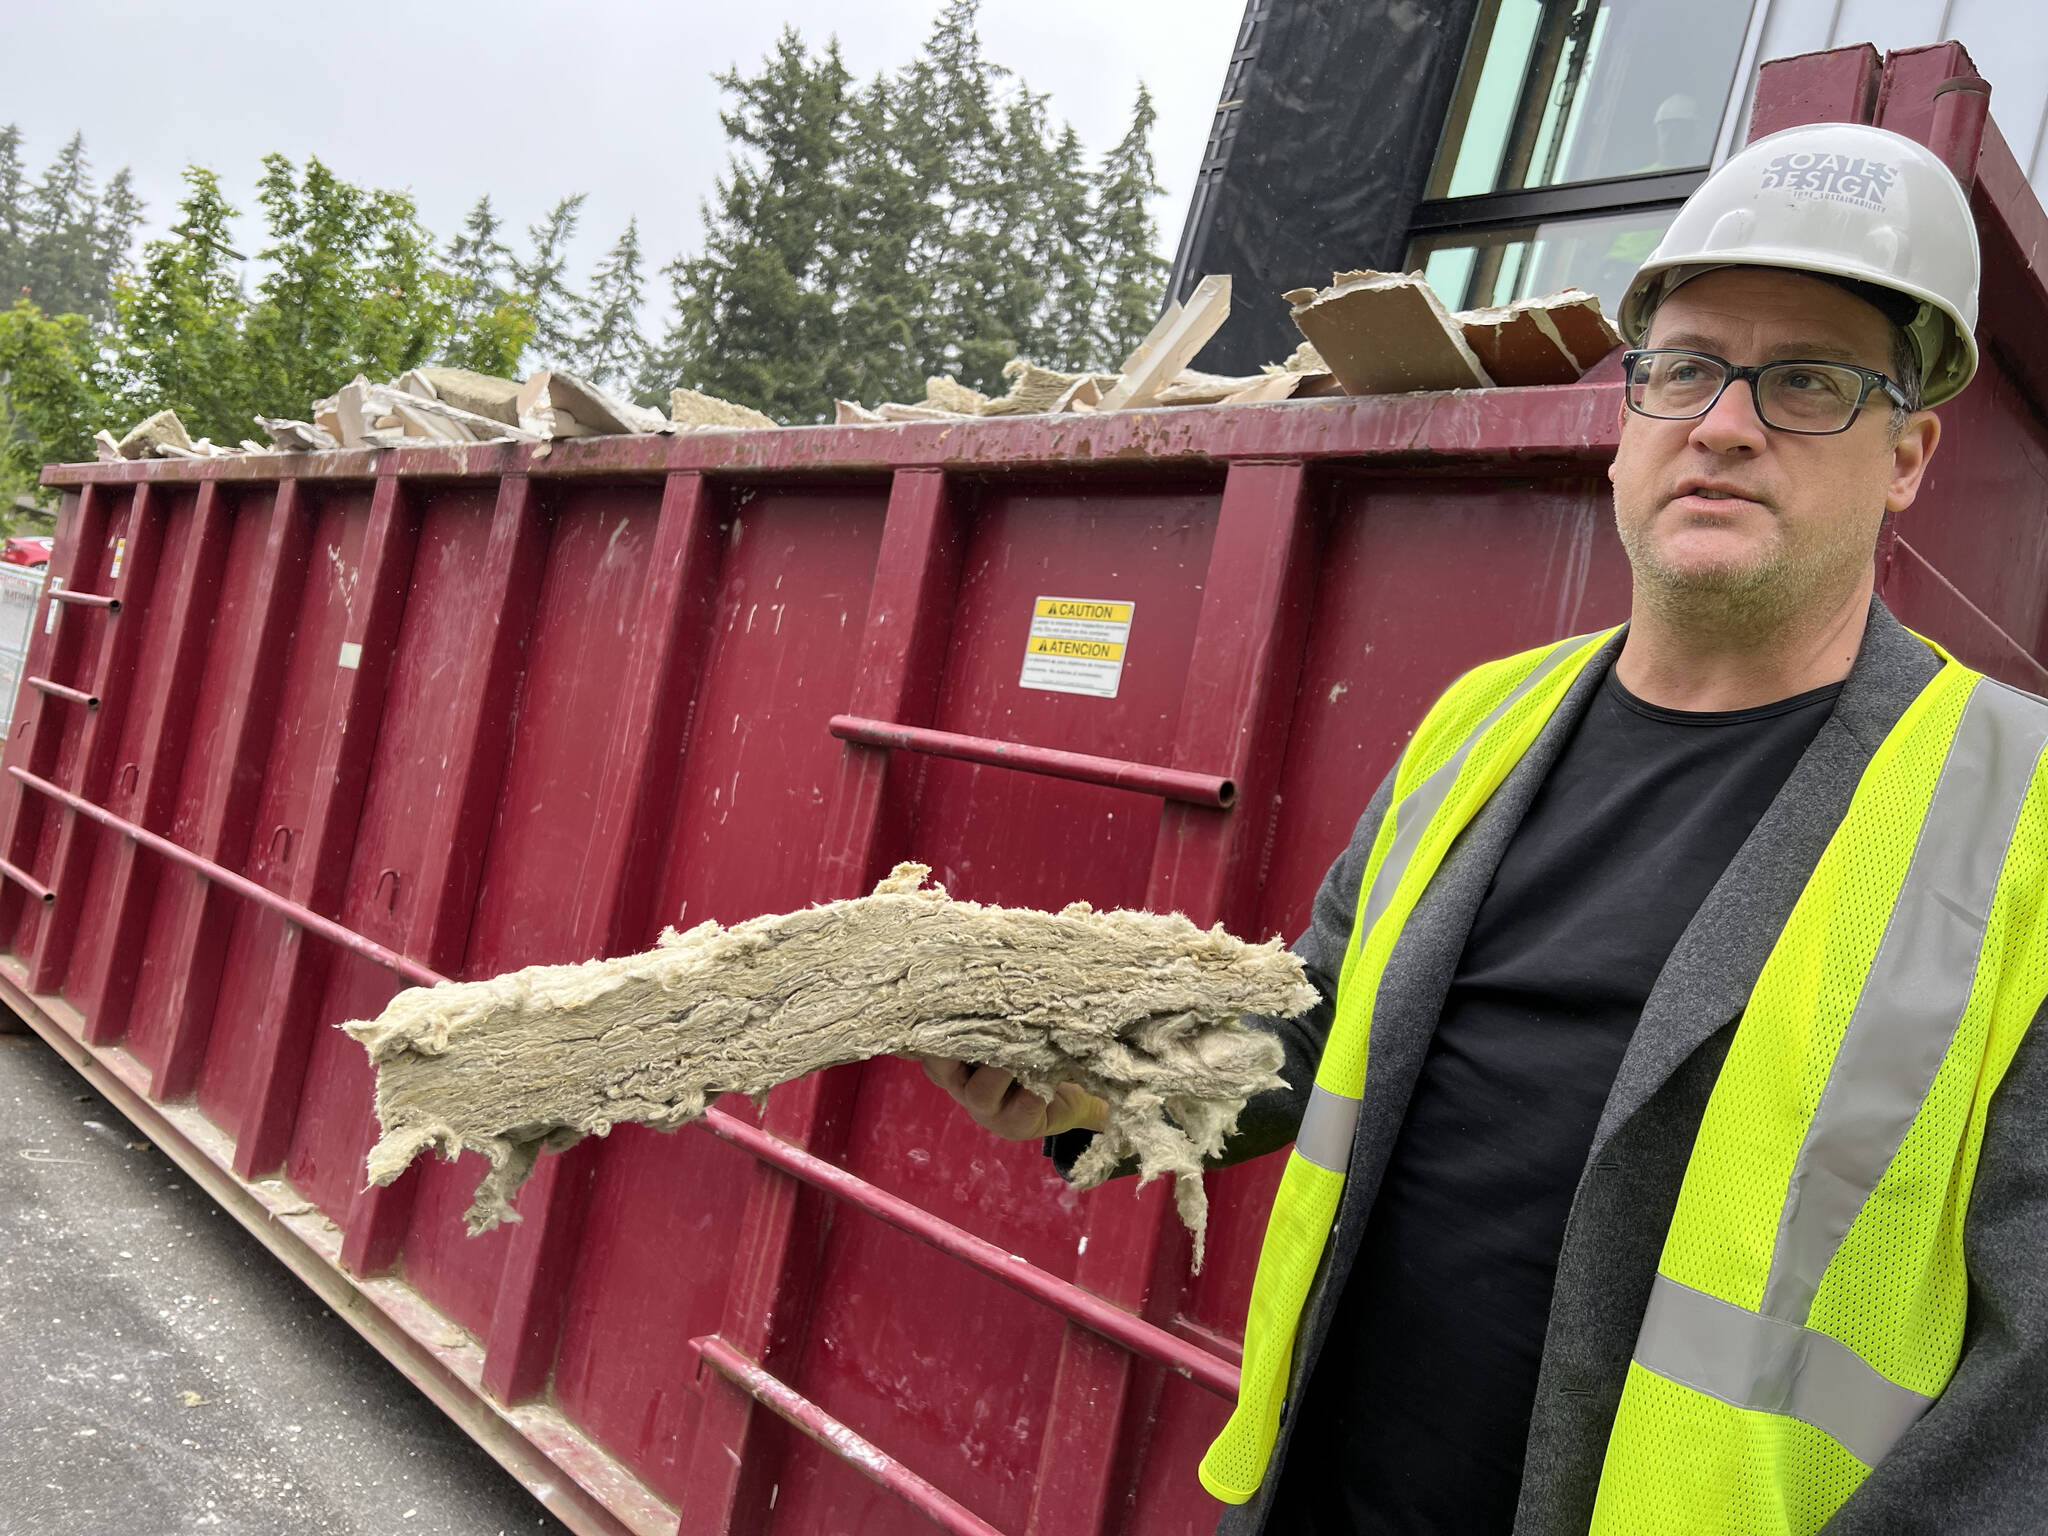 Matthew Coates holds a piece of mineral wool insulation slated for reuse. The material is made from rocks, is non-toxic and non-flammable.